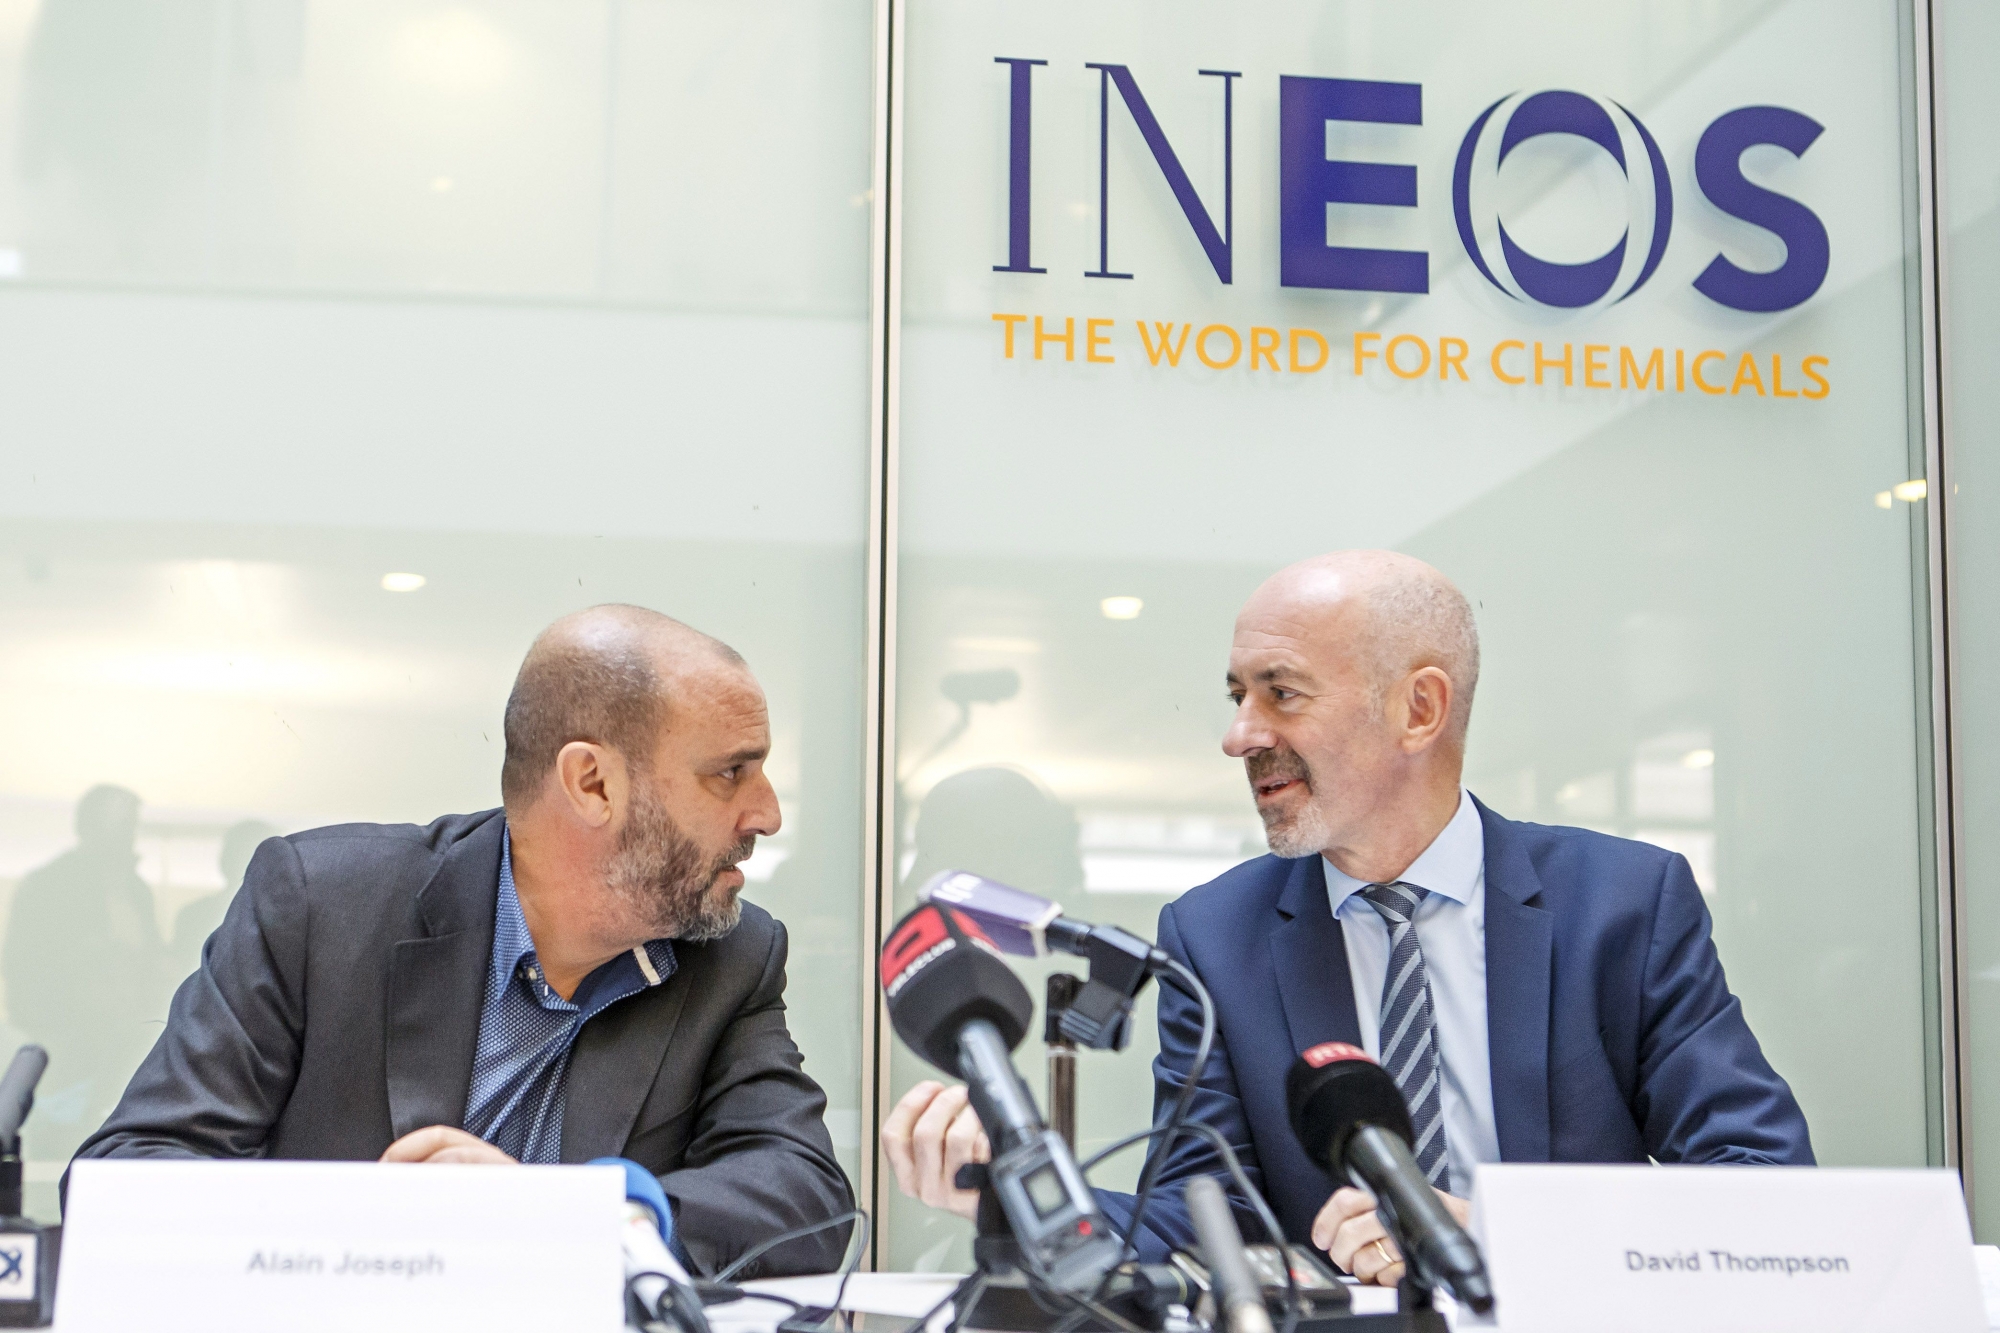 The new president of the FC Lausanne-Sport David Thompson, right, CEO of INEOS, speaks next to Alain Joseph, left, former President of FC Lausanne-Sport, during a press conference announcing that Lausanne-Sport was bought by the company INEOS, in Rolle, canton of Vaud, Switzerland, on Monday, November 13, 2017. (KEYSTONE/Salvatore Di Nolfi)